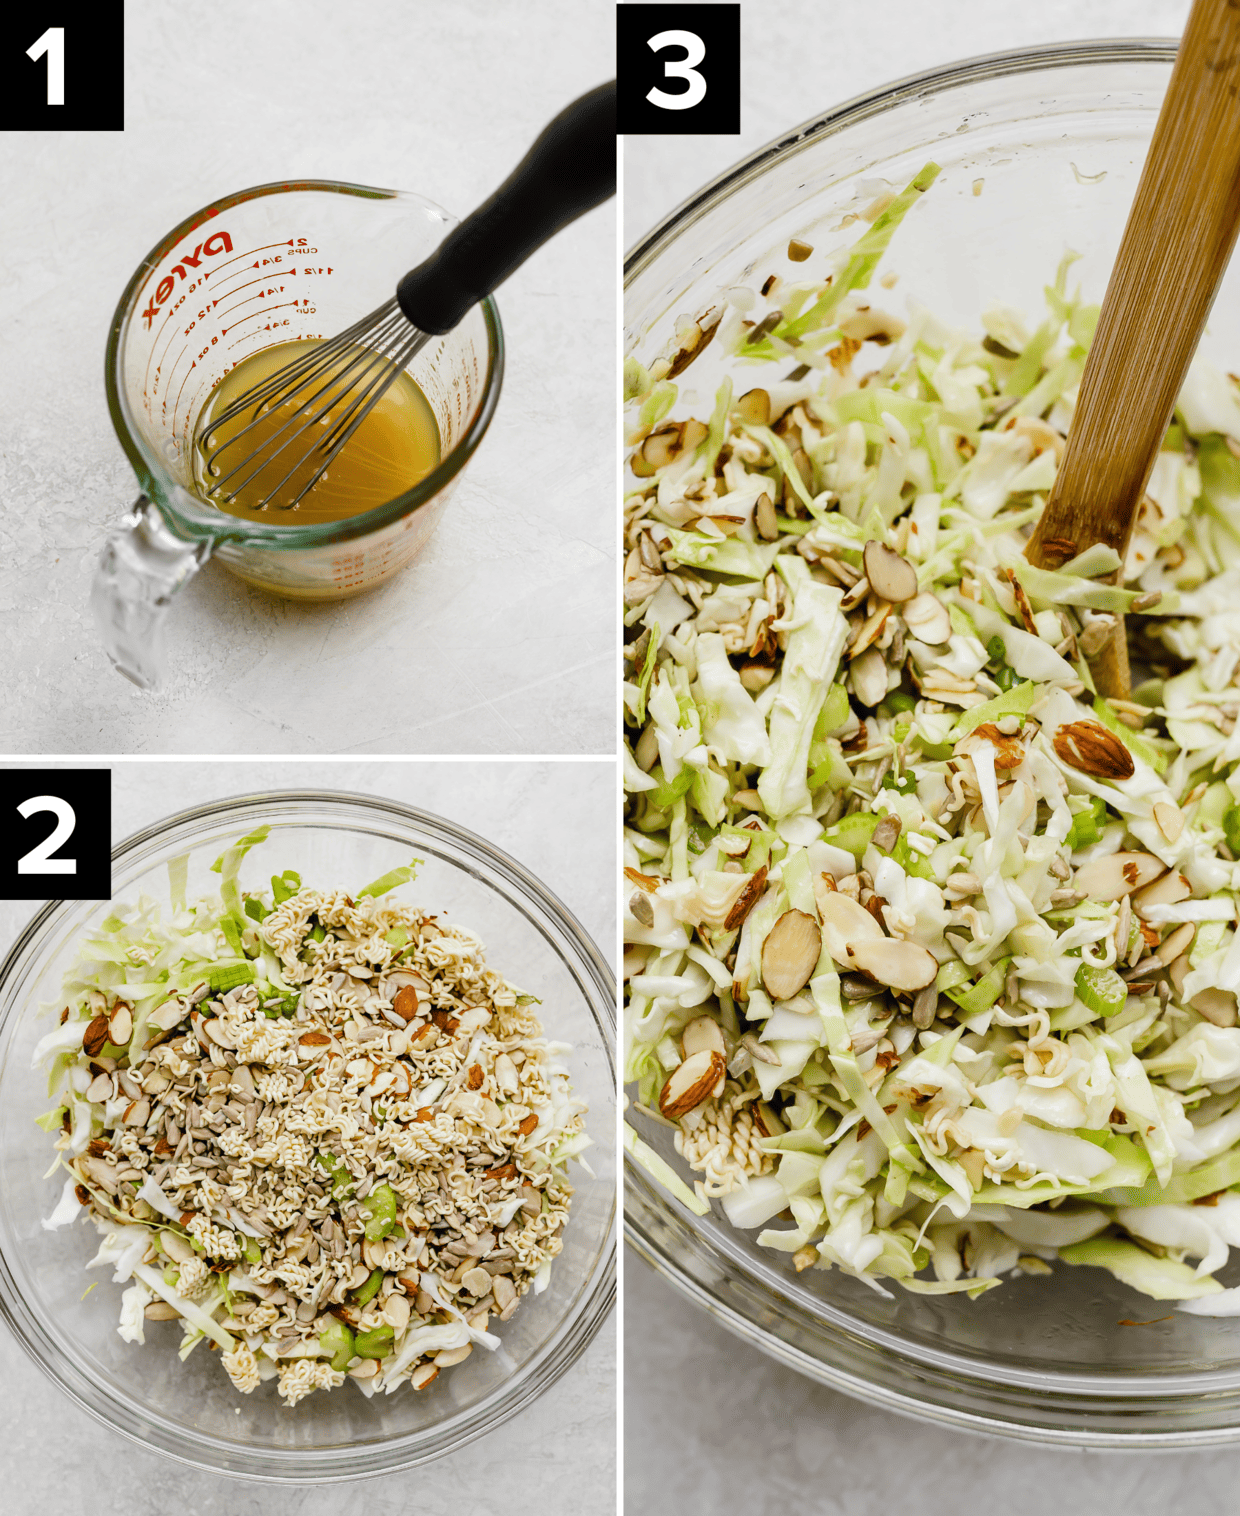 Three images showing how to make cabbage salad, top left image is cabbage salad dressing in a glass measuring cup, bottom left is ramen over a bed of chopped cabbage, right image is mixed Crunchy Cabbage Salad in a glass bowl.